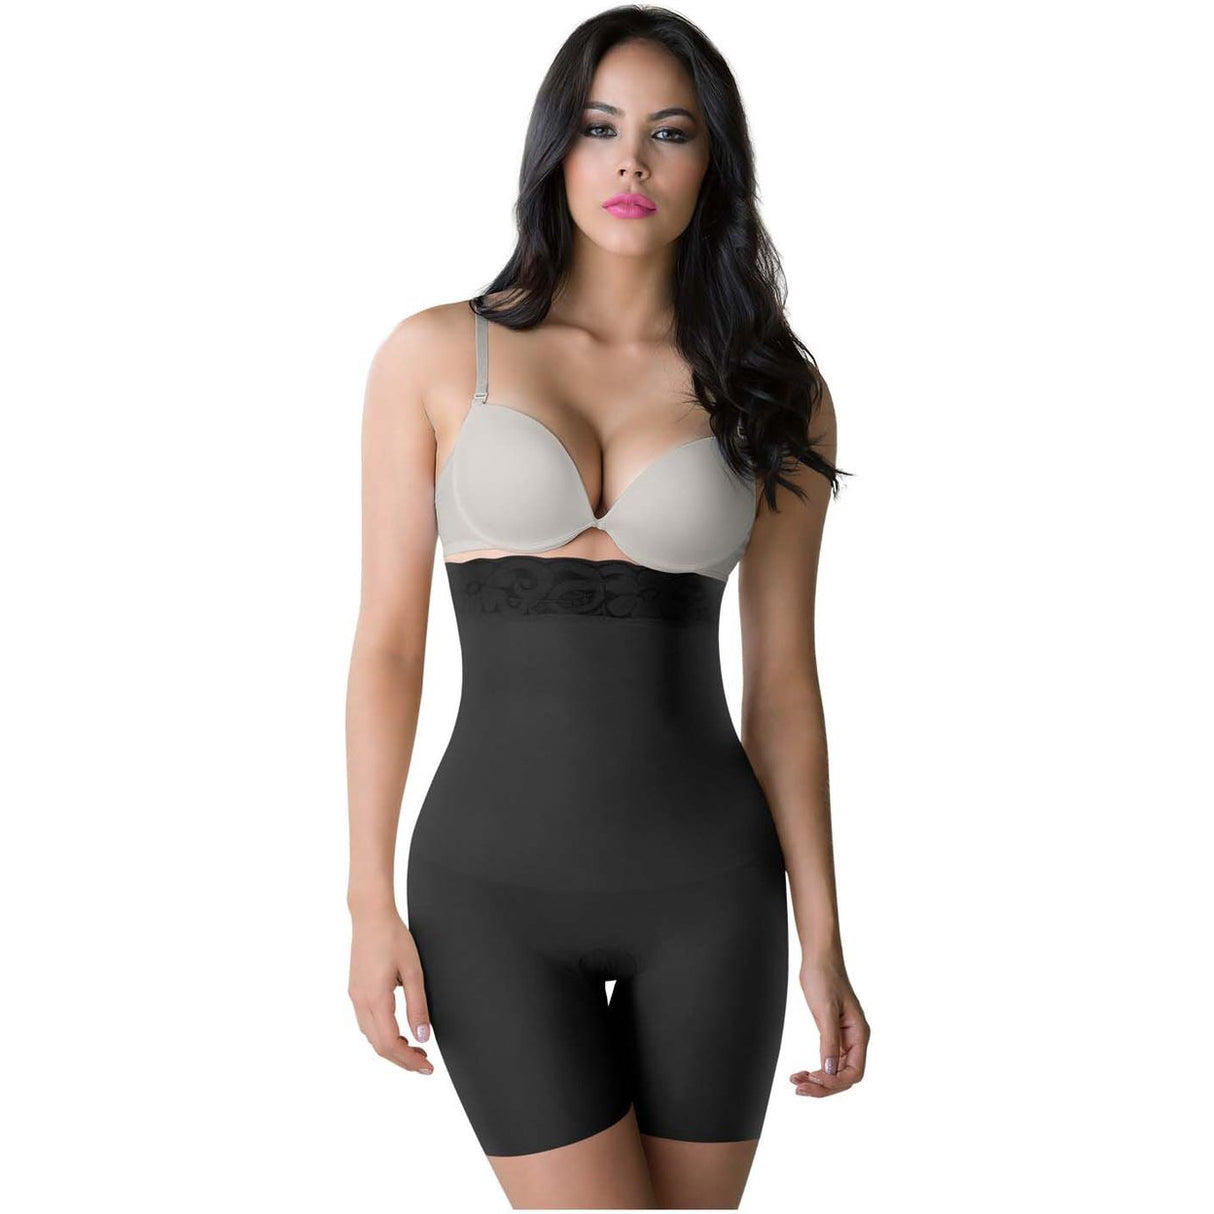 Extra high waist shorts | Shapes and controls abdomen, hips, legs and  buttocks with low compression